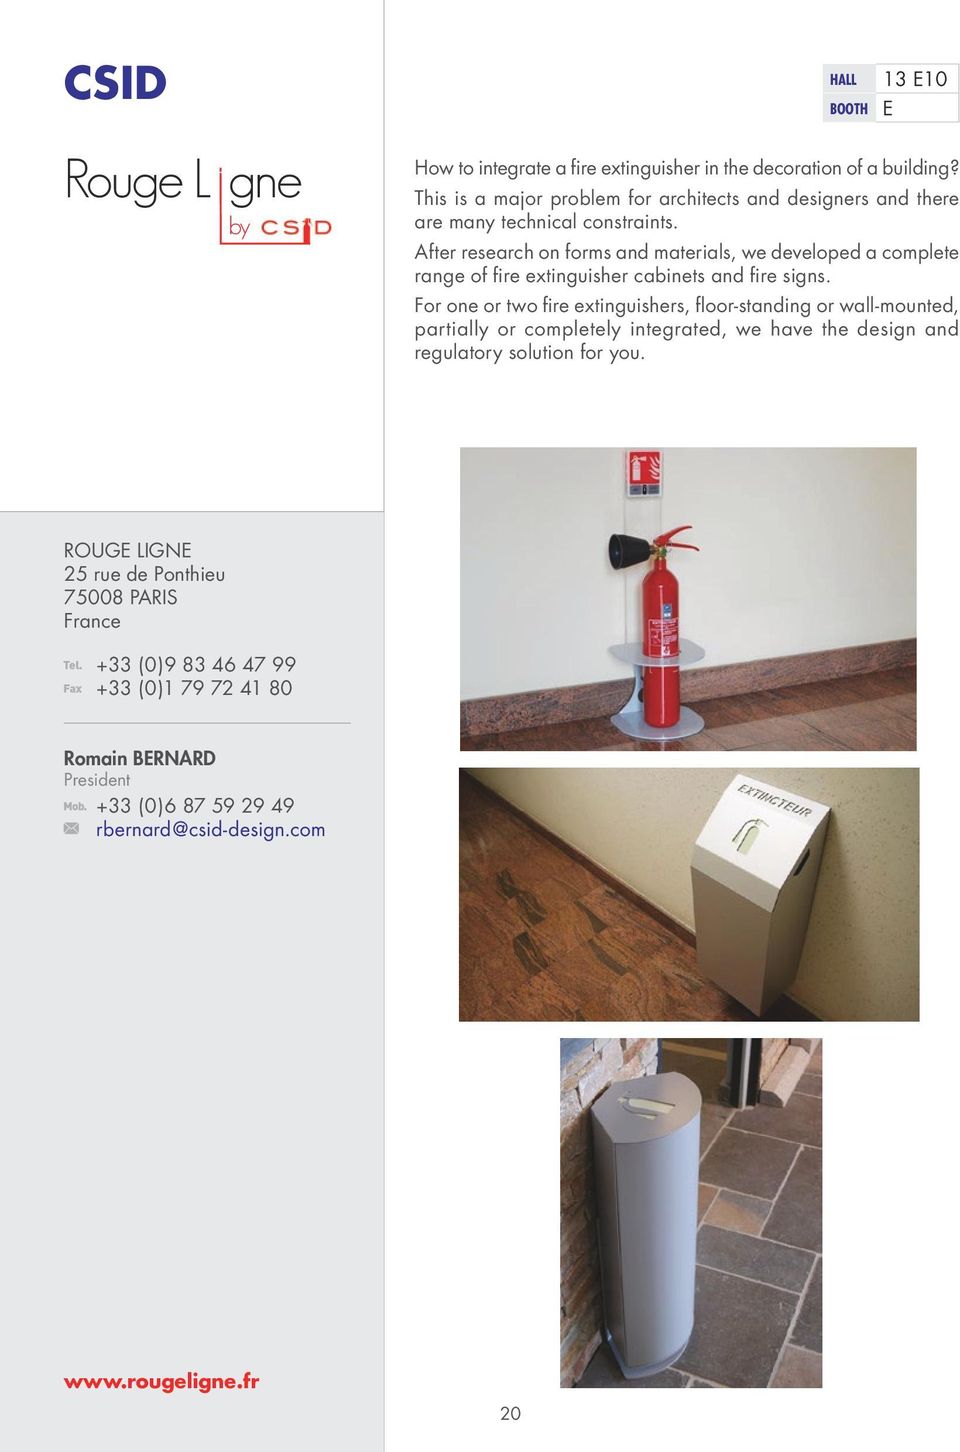 After research on forms and materials, we developed a complete range of fire extinguisher cabinets and fire signs.